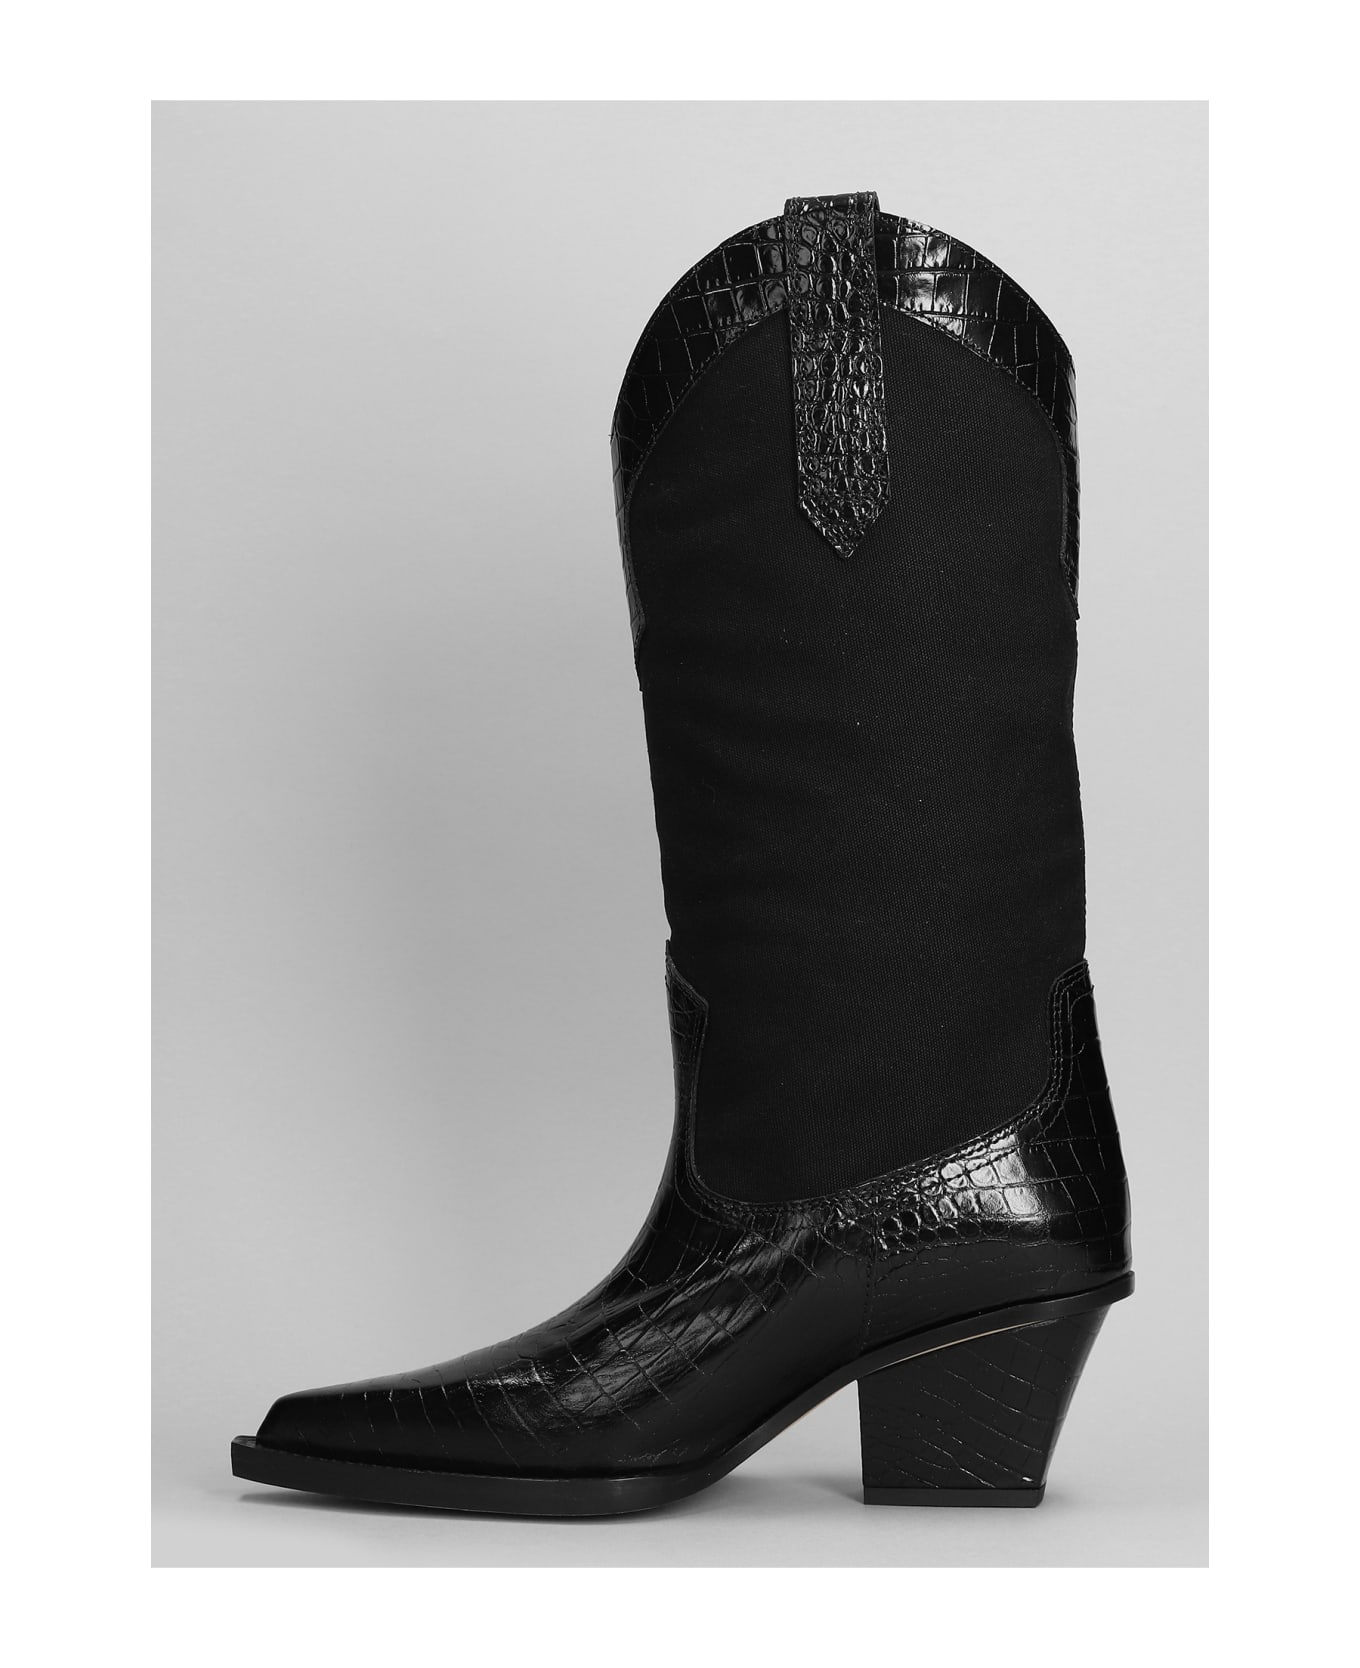 Paris Texas Rosario Texan Boots In Black Leather And Fabric - black ブーツ